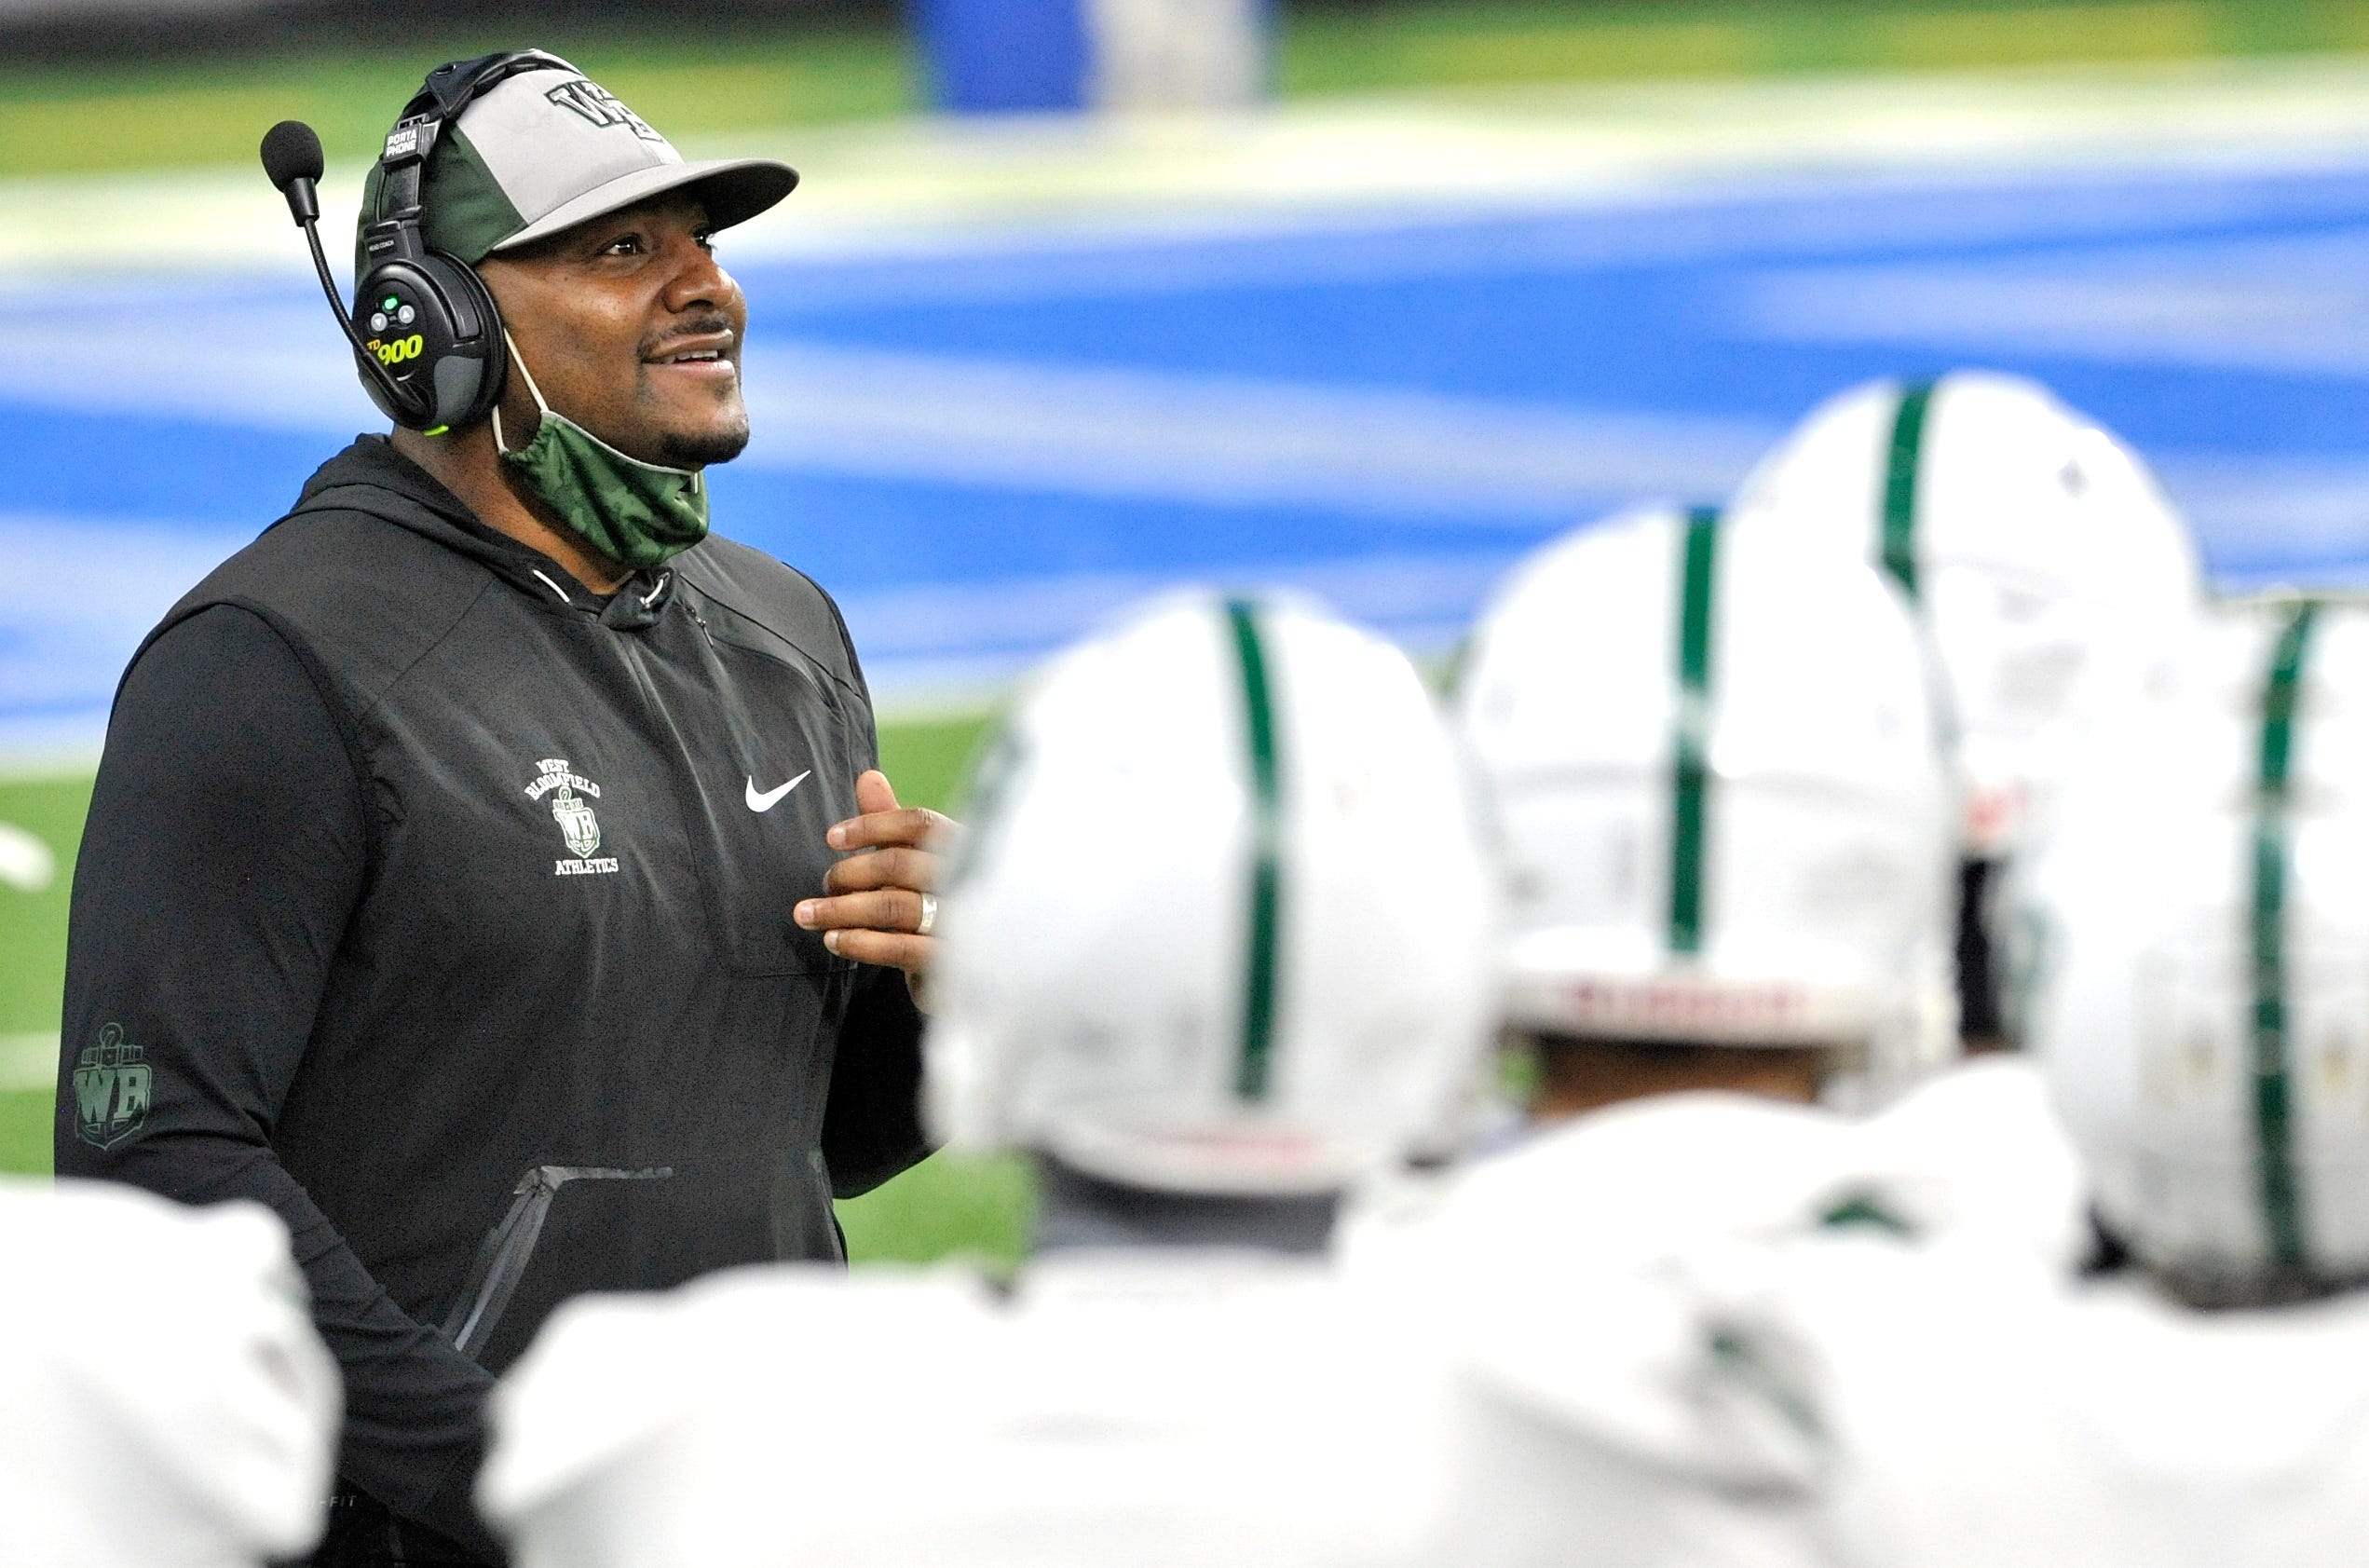 West Bloomfield head coach Ron Bellamy smiles after his team's sacks the Davison quarterback near the end of the third quarter.